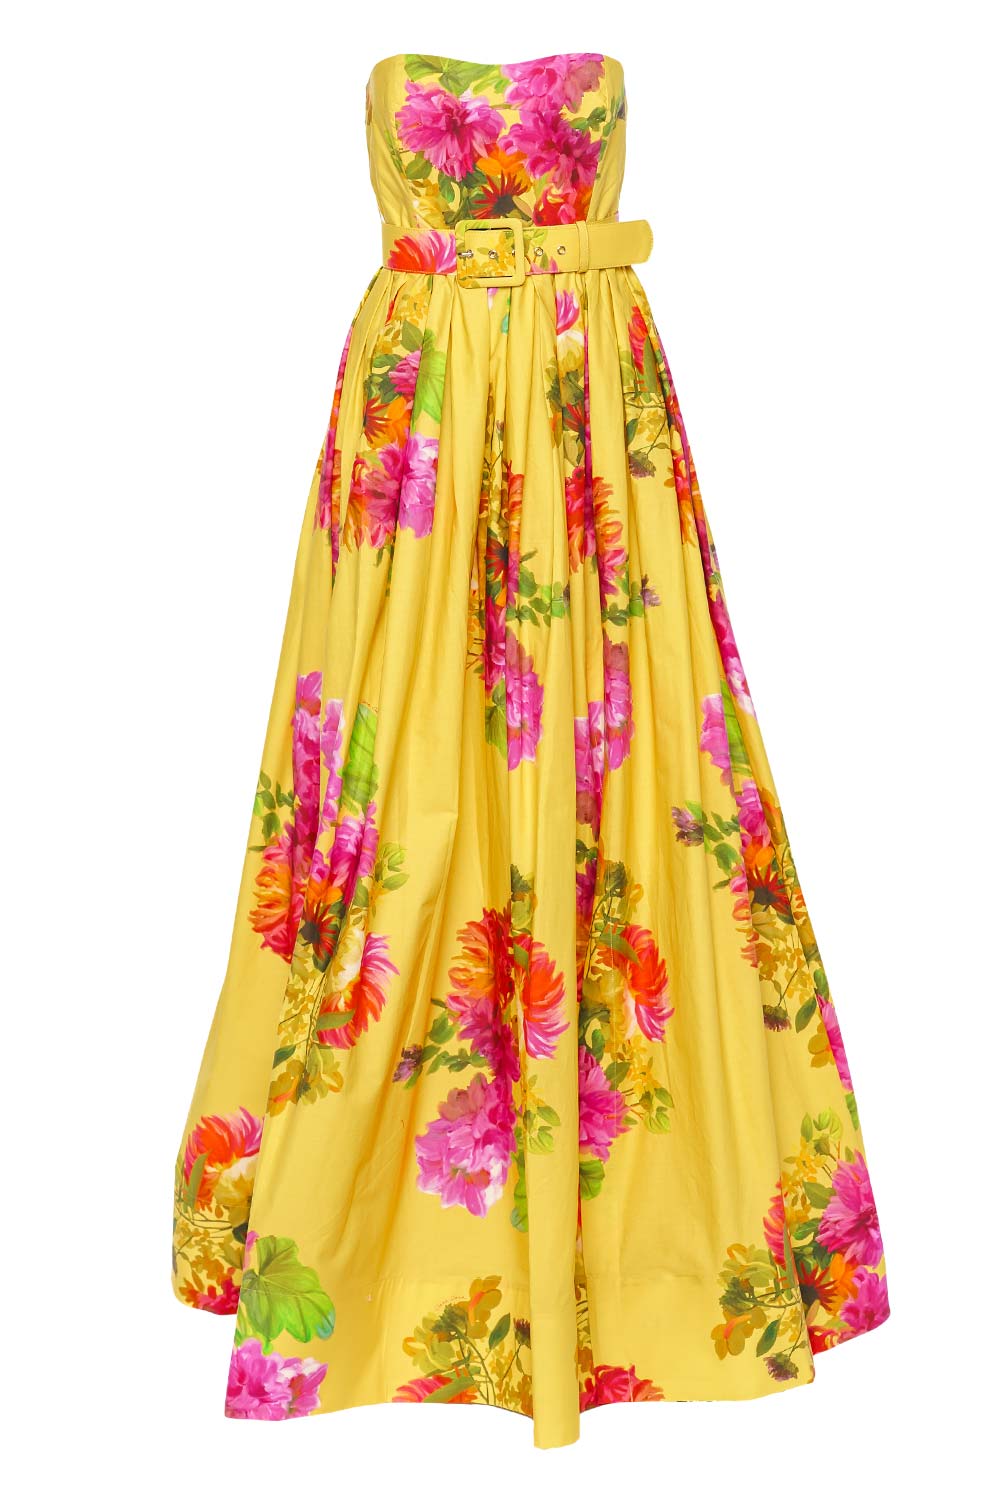 Cara Cara Greenfield Strapless Belted Floral Maxi Dress